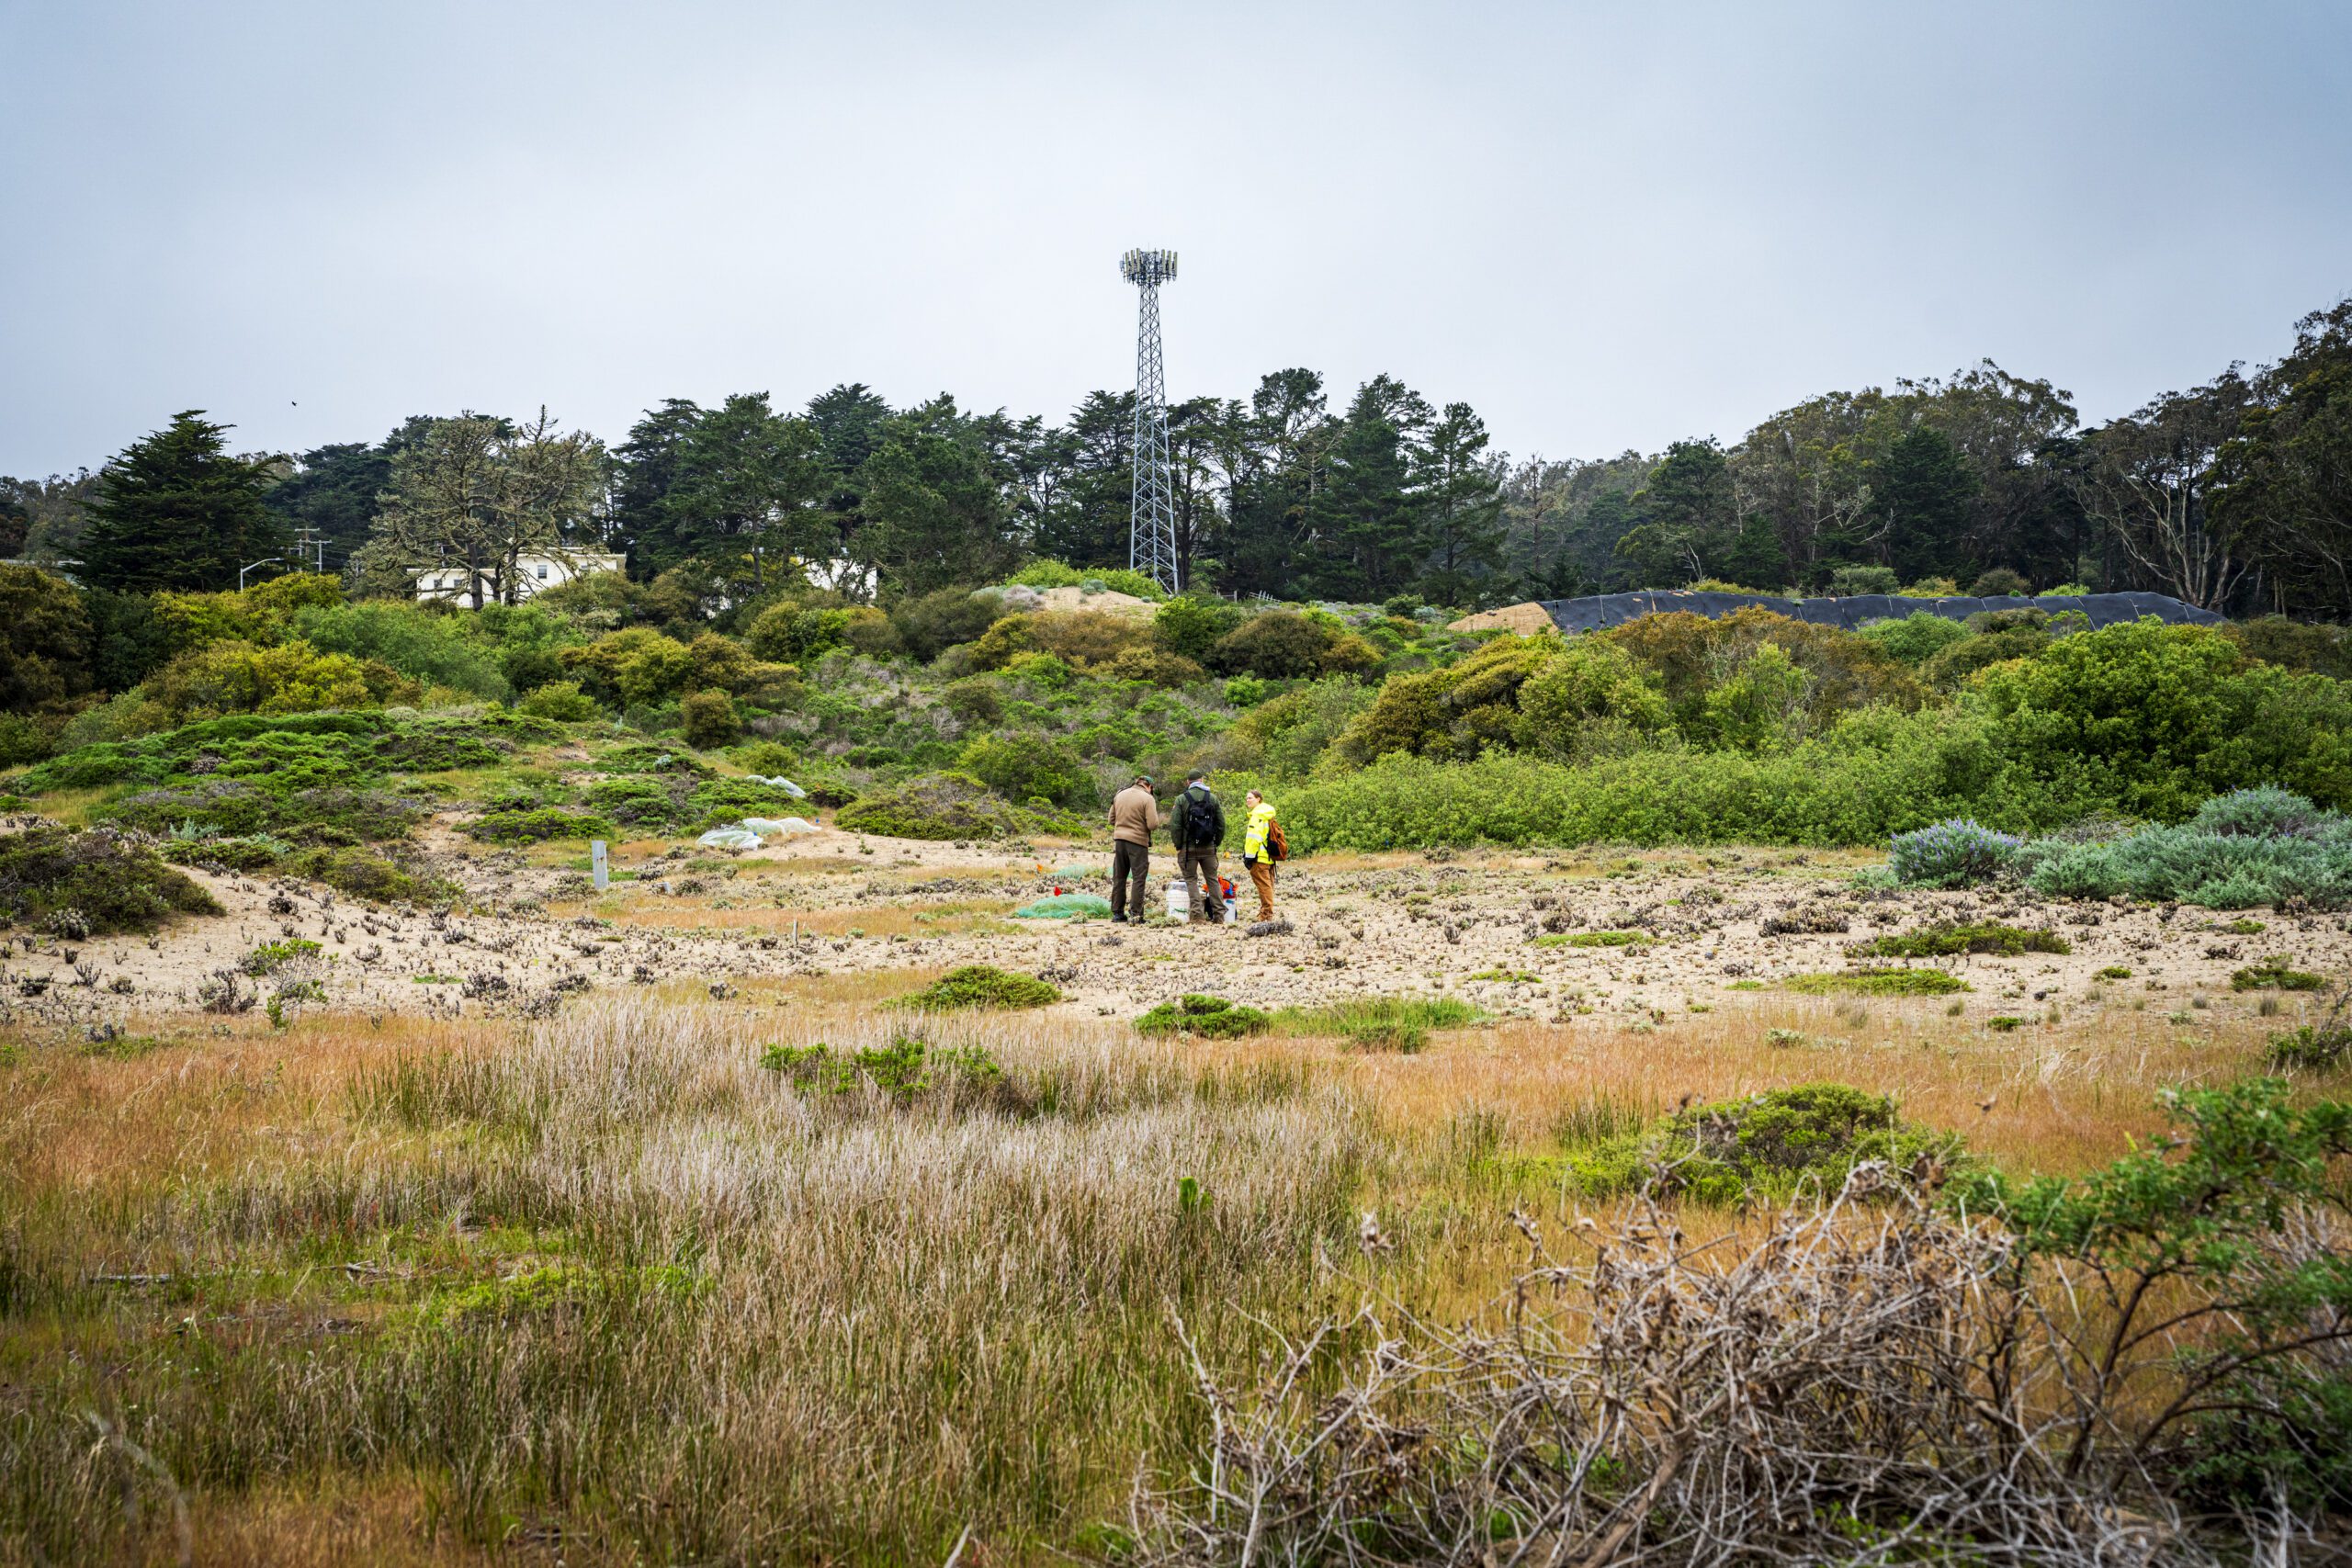 The butterfly’s successful release in San Francisco was made possible by the restoration of more than 50 acres of the Presidio’s dune habitat